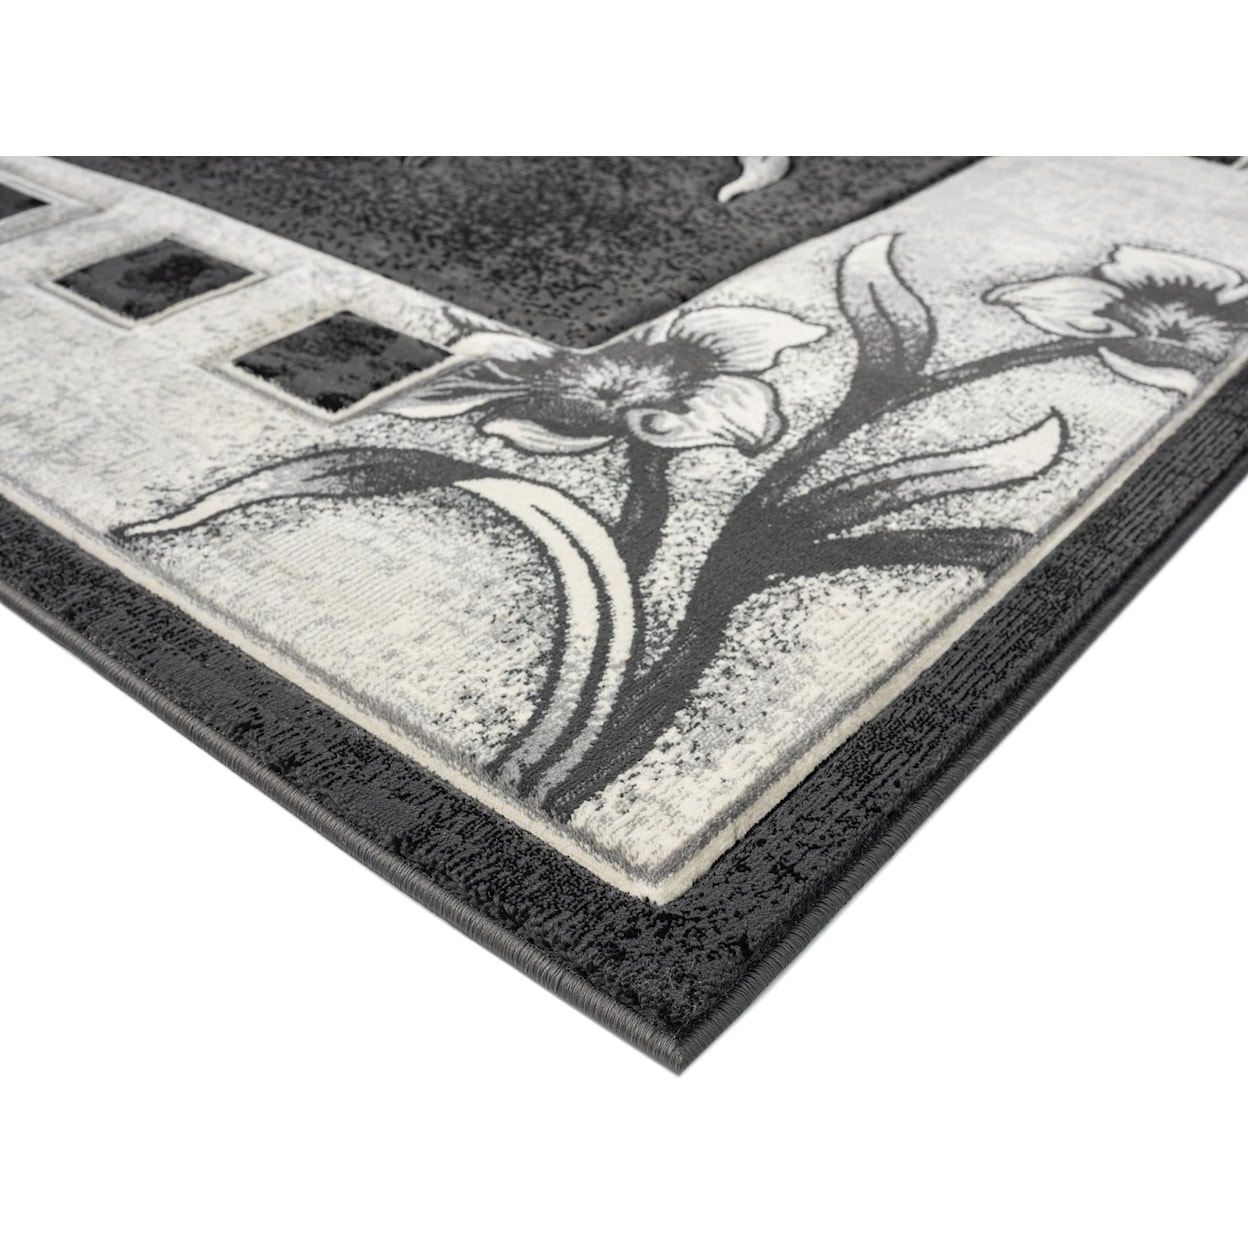 MDA Rugs Rhodes Collection RHODES 5X8 BLACK & WHITE AREA RUG |